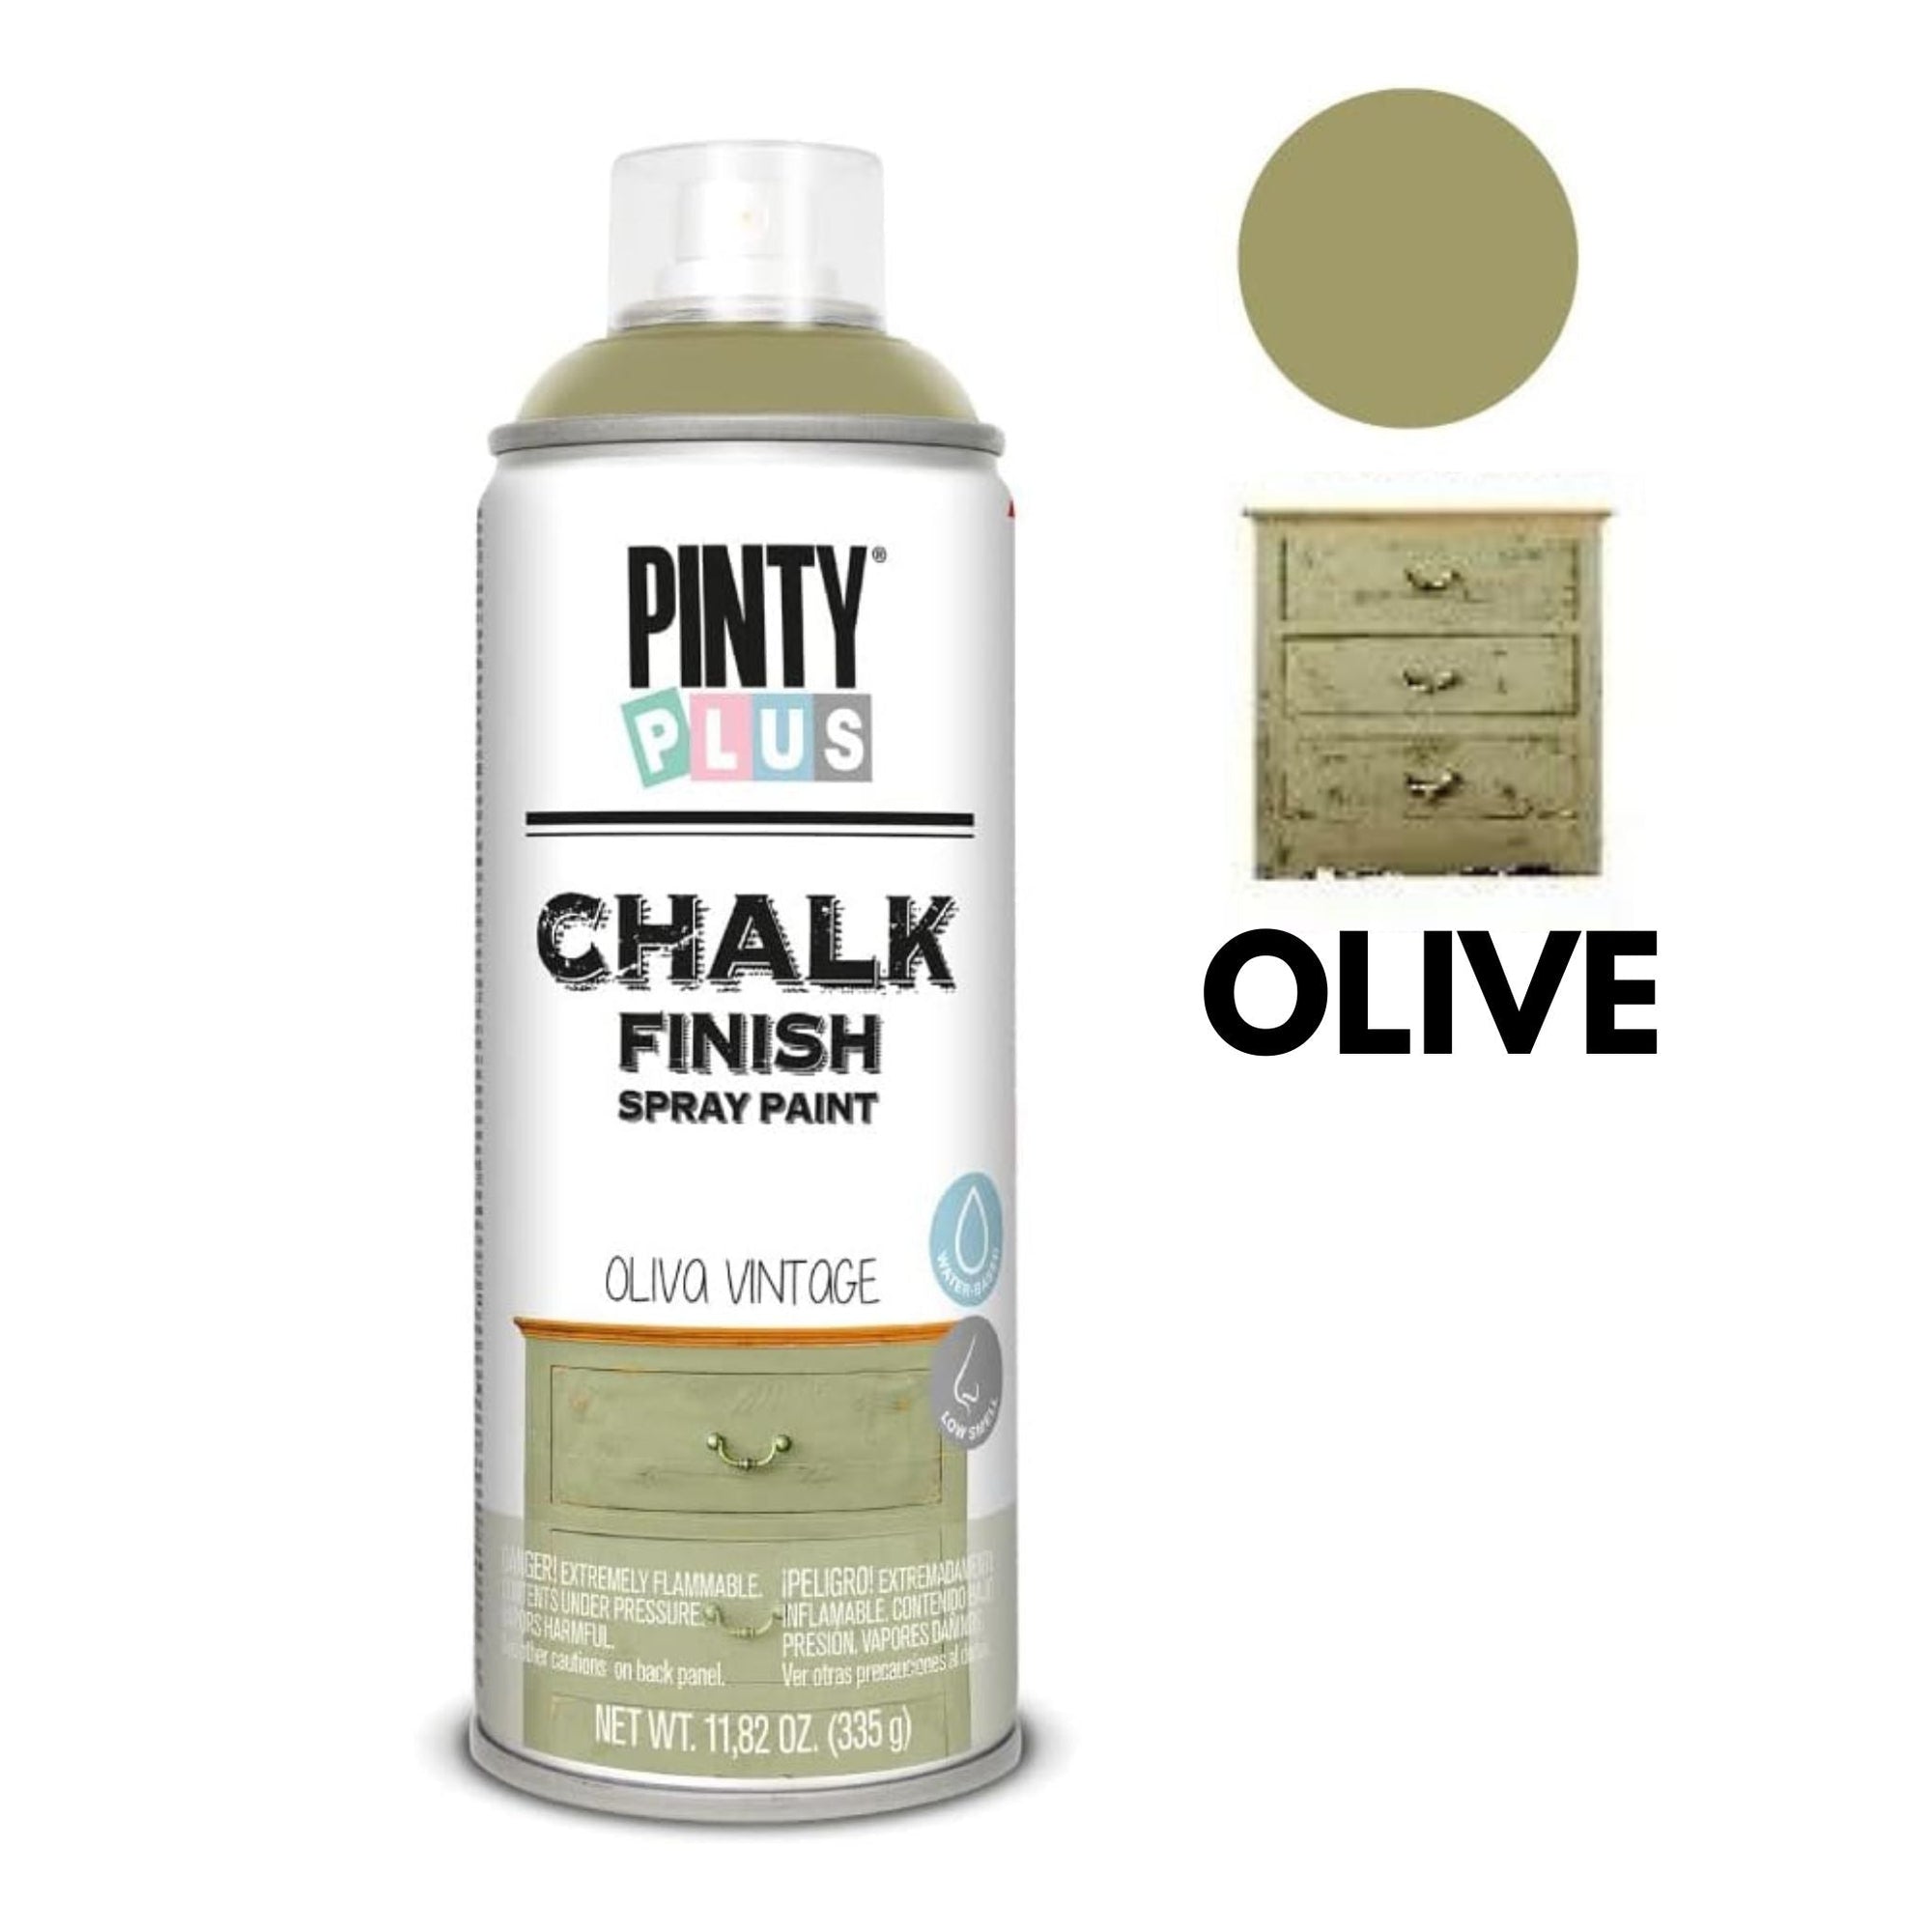 Olive Chalk Finish Spray Paint Pintyplus | 6 Cans - South East Clearance Centre